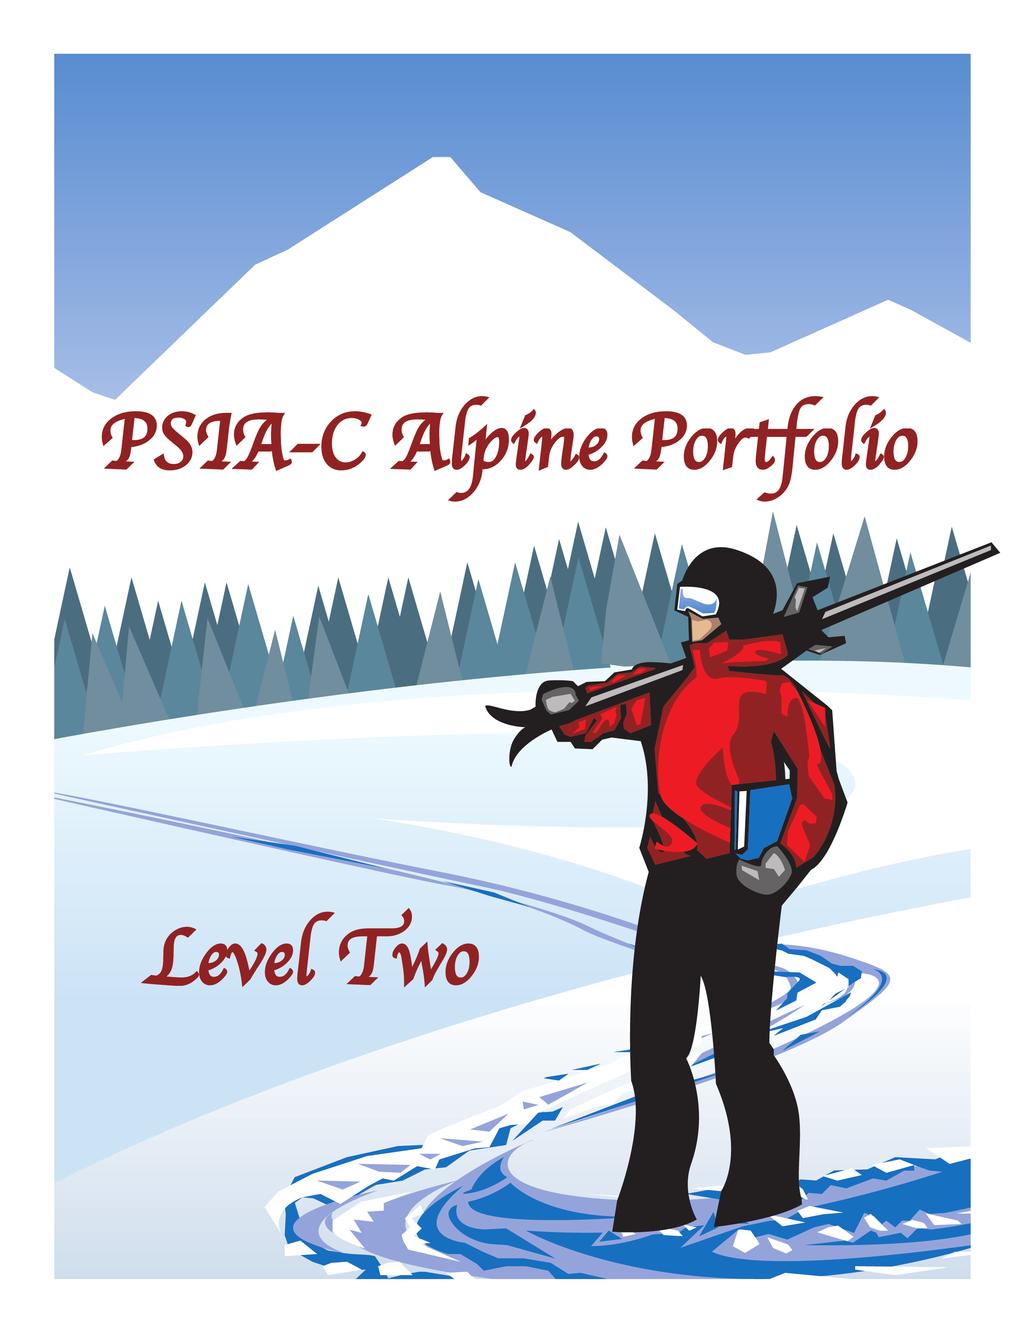 The Portfolio Series has been added to the PSIA-C Curriculum to compliment the